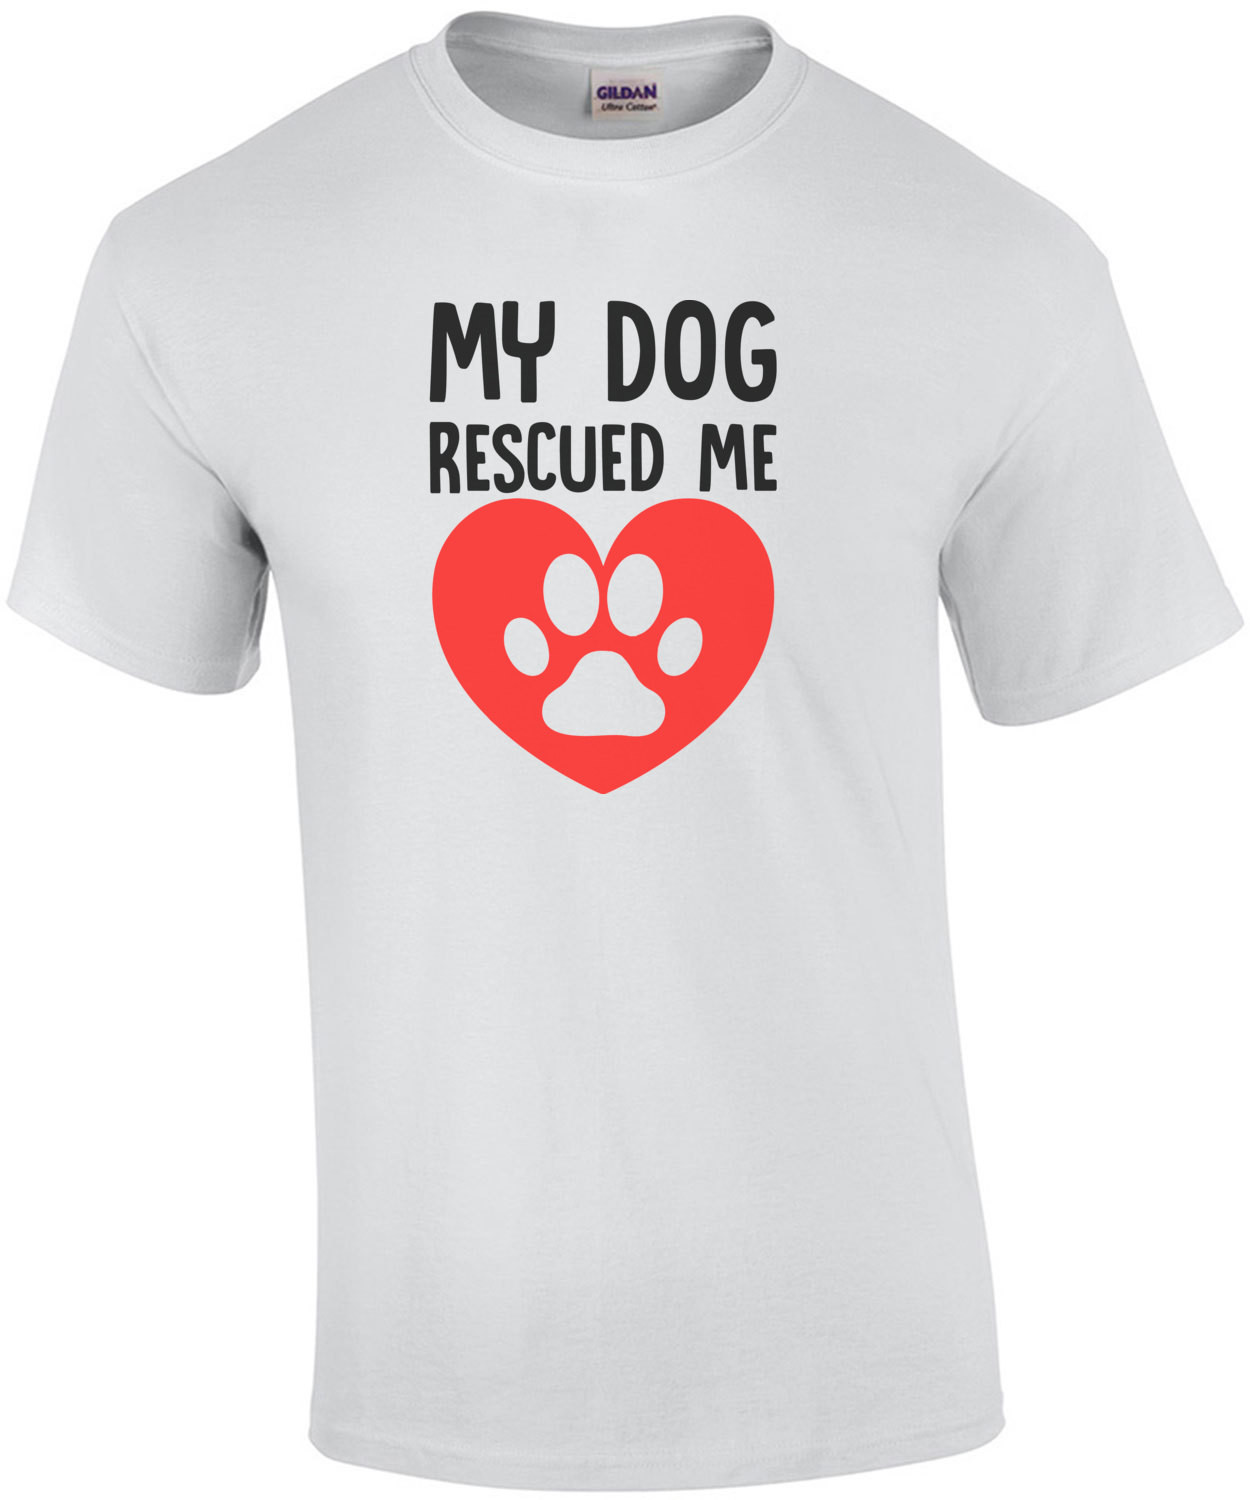 My dog rescued me - funny dog lover t-shirt